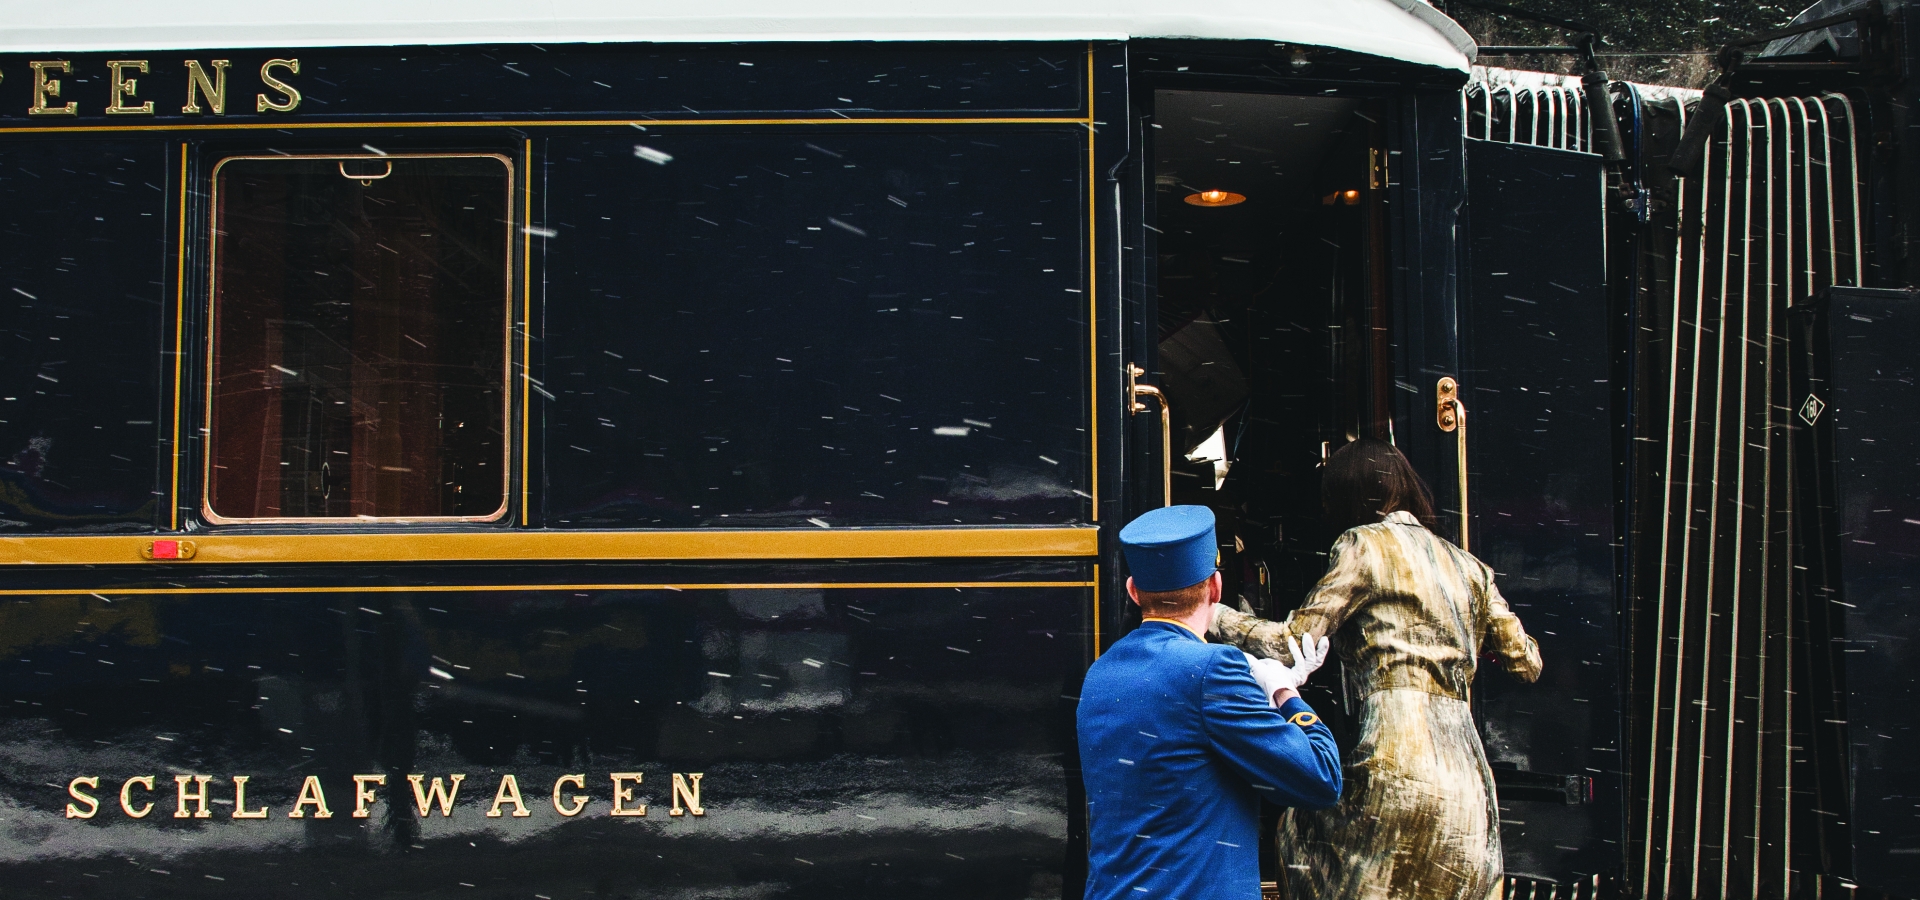 Venice Simplon Orient Express Frequently Asked Questions